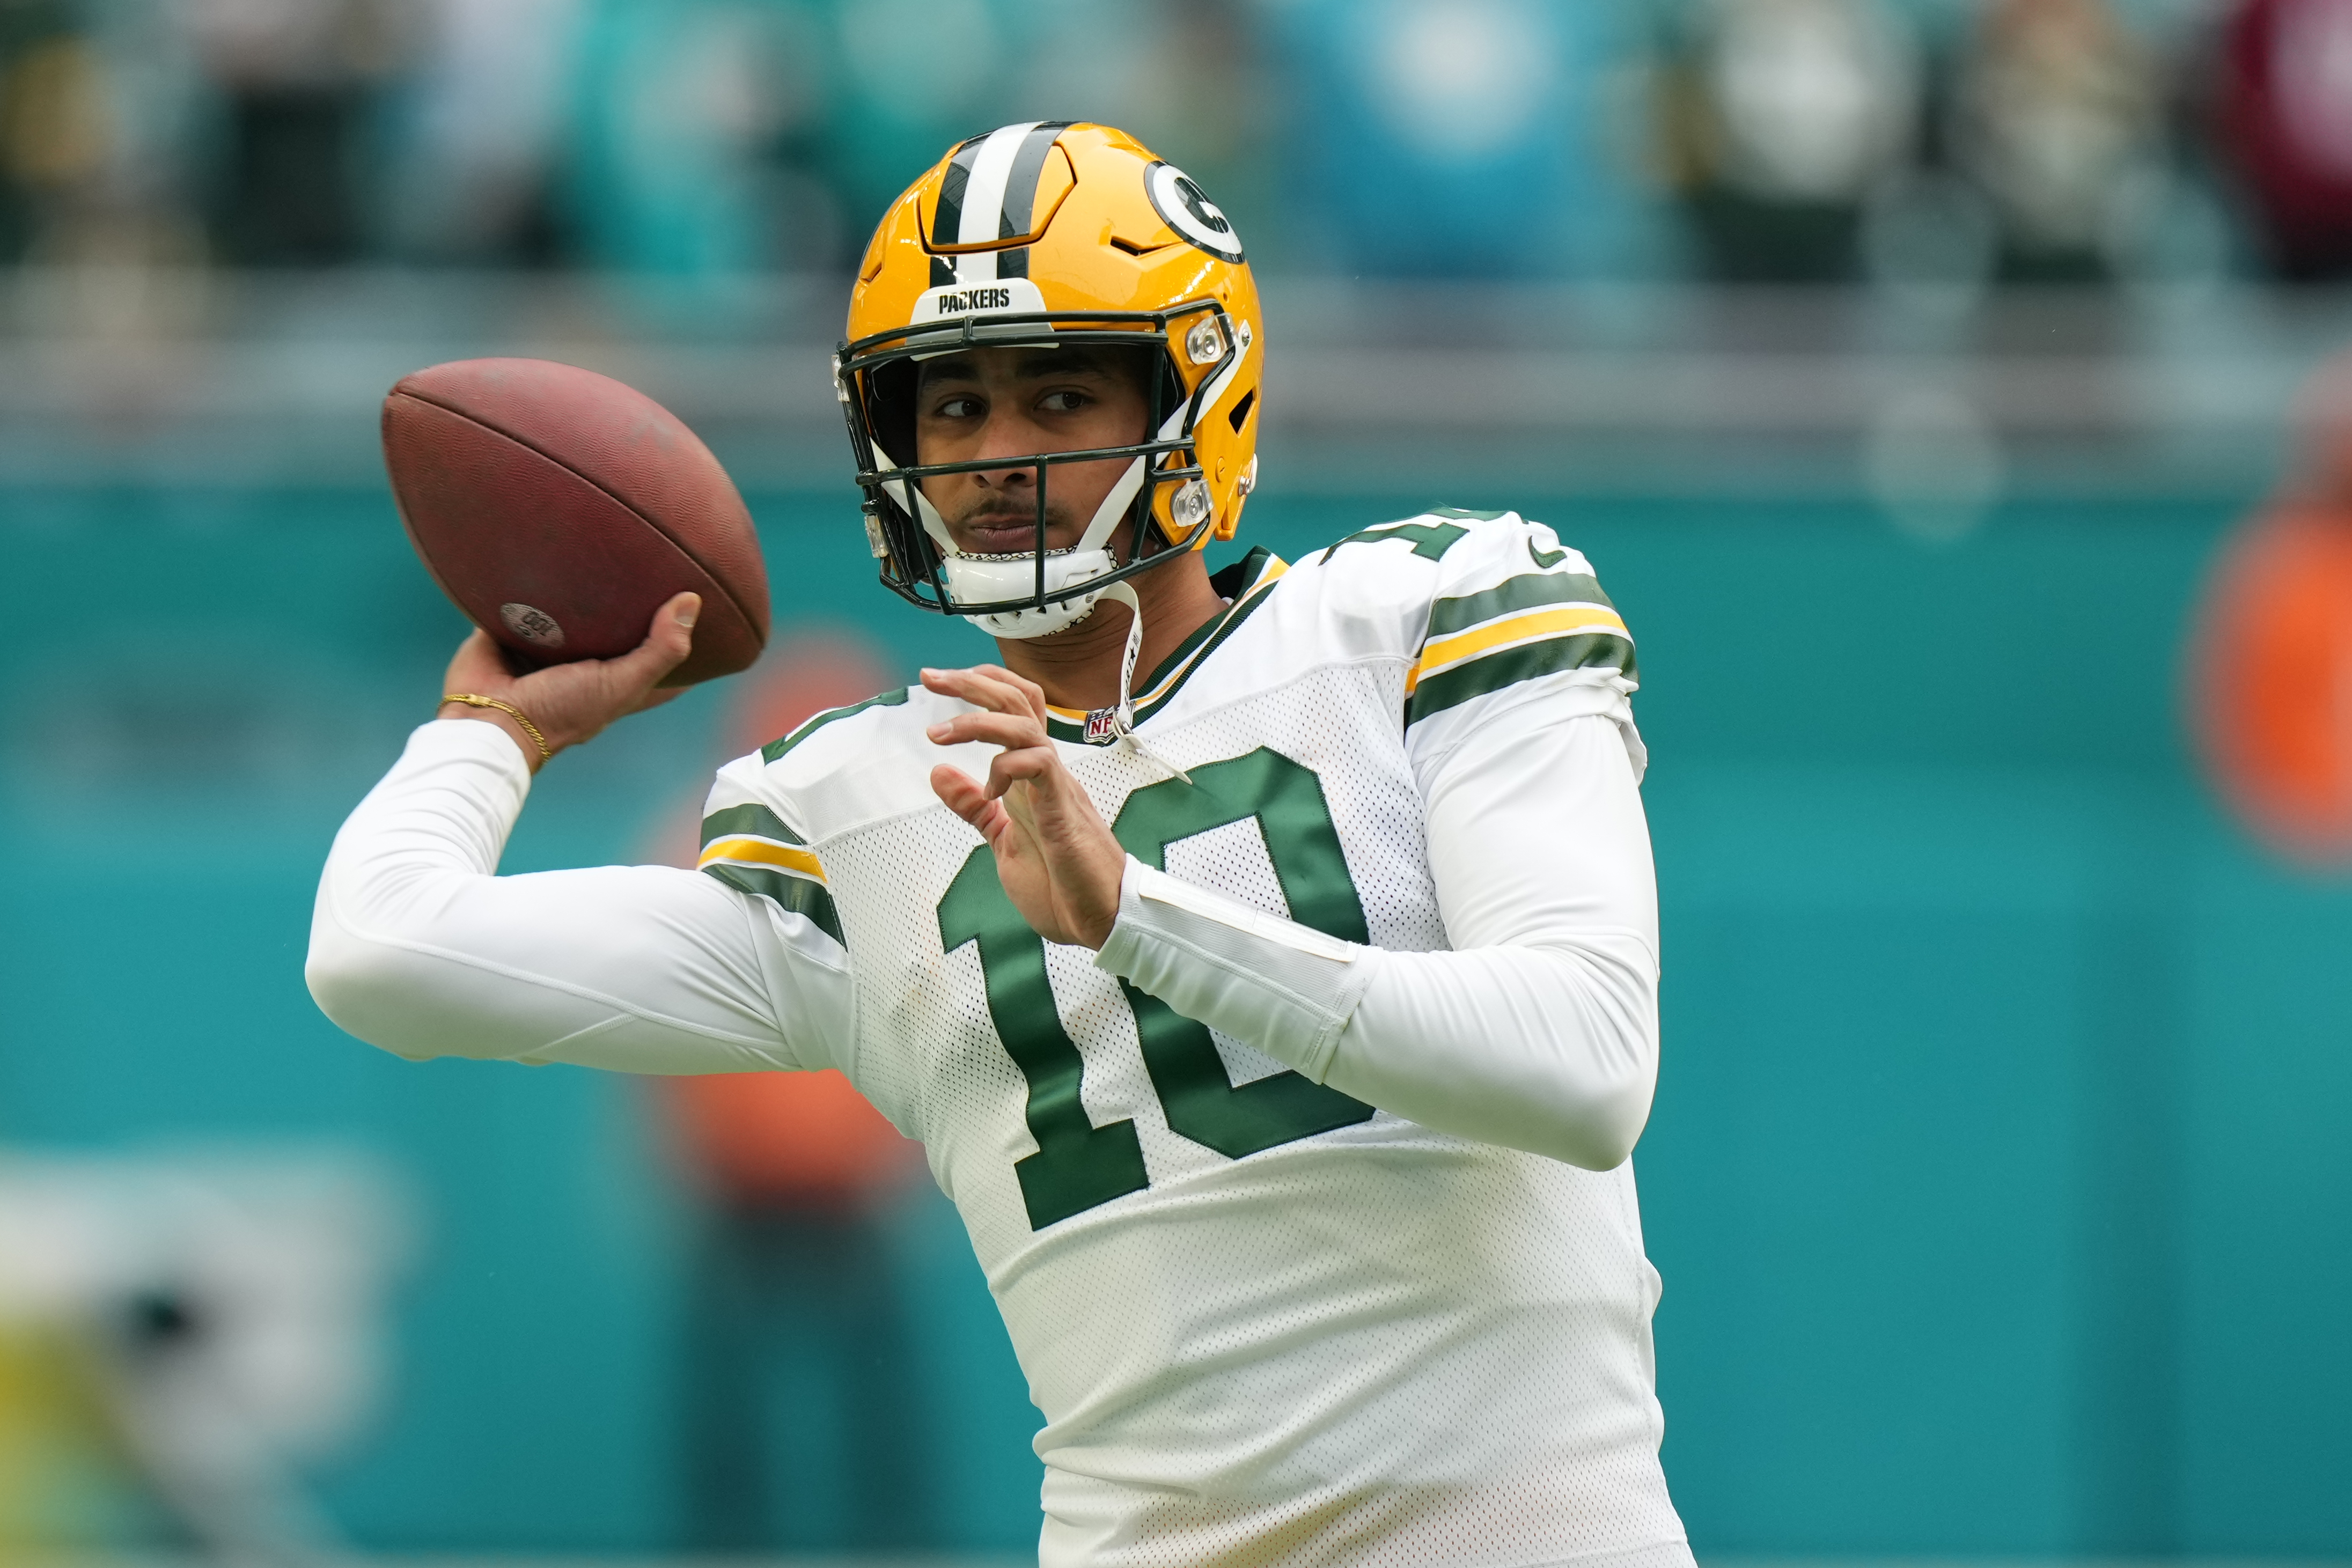 Quarterback Jordan Love of the Green Bay Packers warms up ahead of the game against the the Miami Dolphins at Hard Rock Stadium, Miami Gardens, December 25, 2022. /CFP